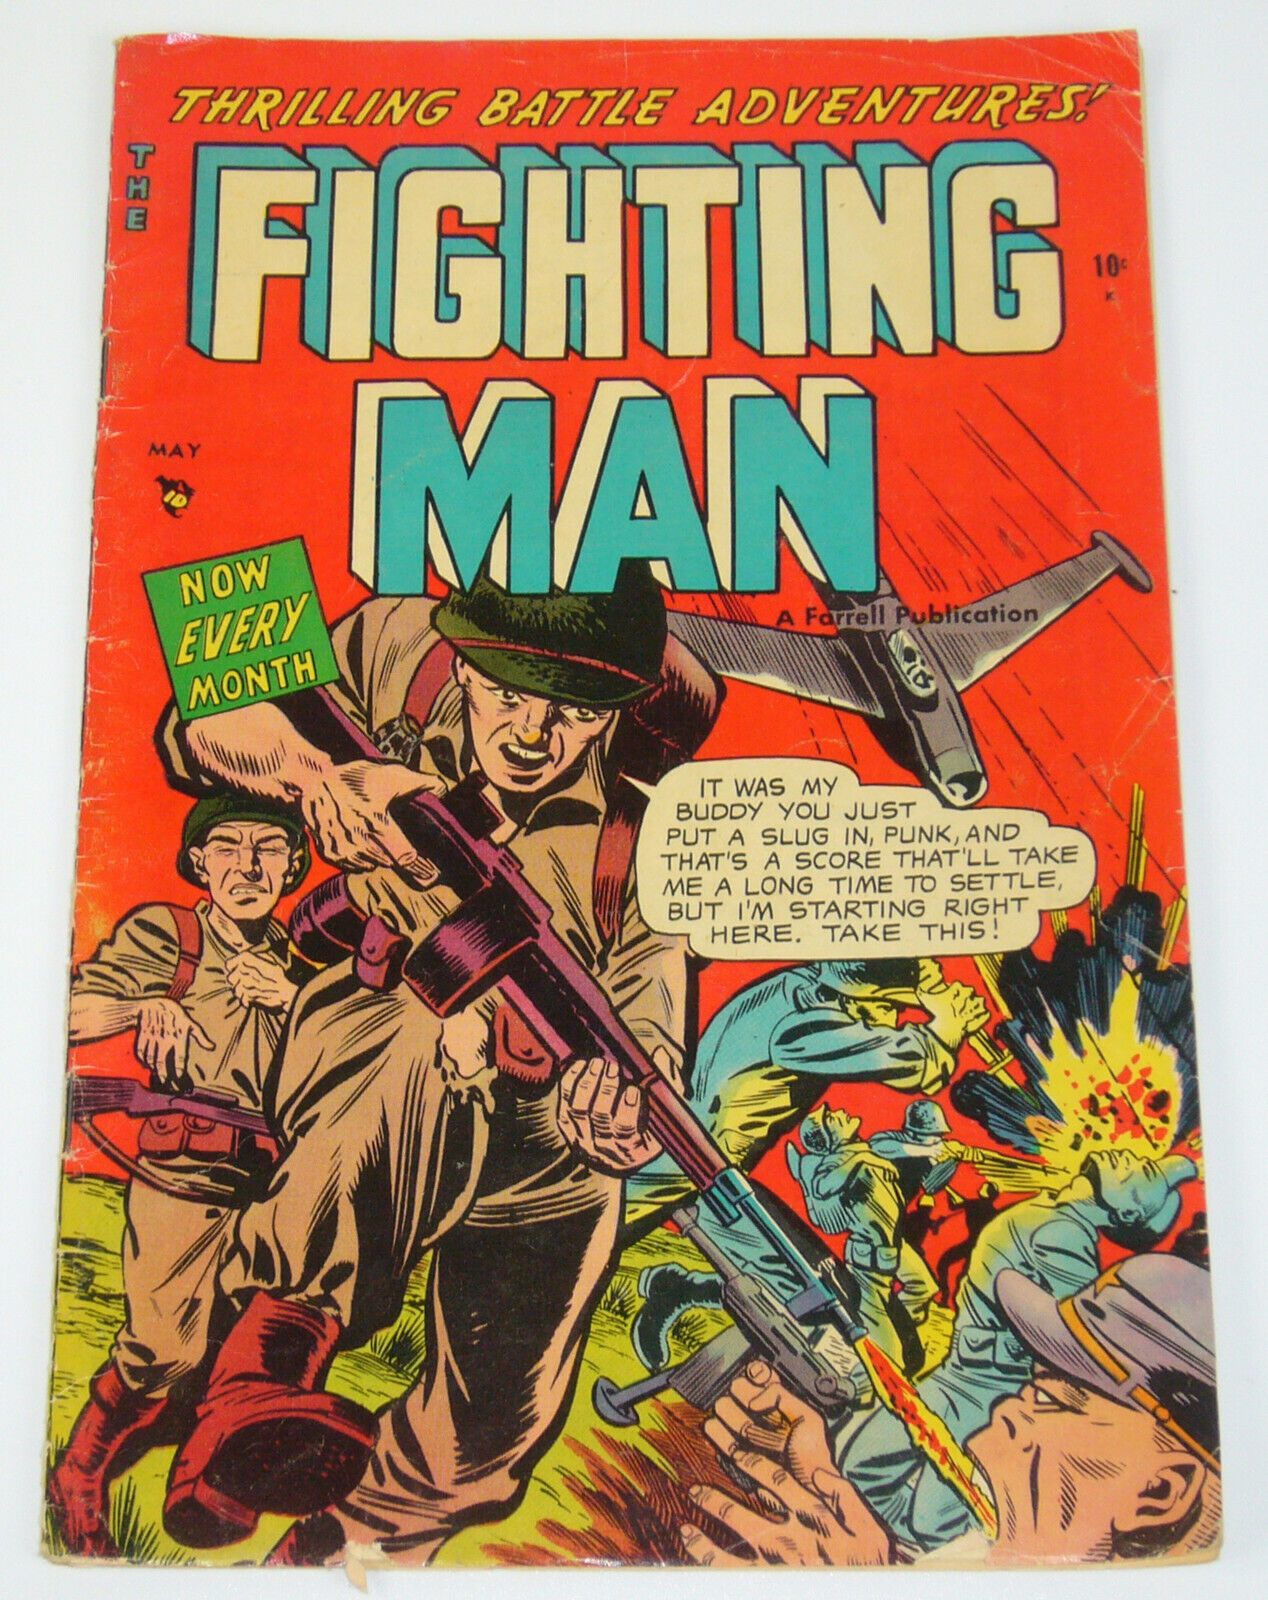 the Fighting Man #7 VG may 1953 - bullet to the face cover - golden age war